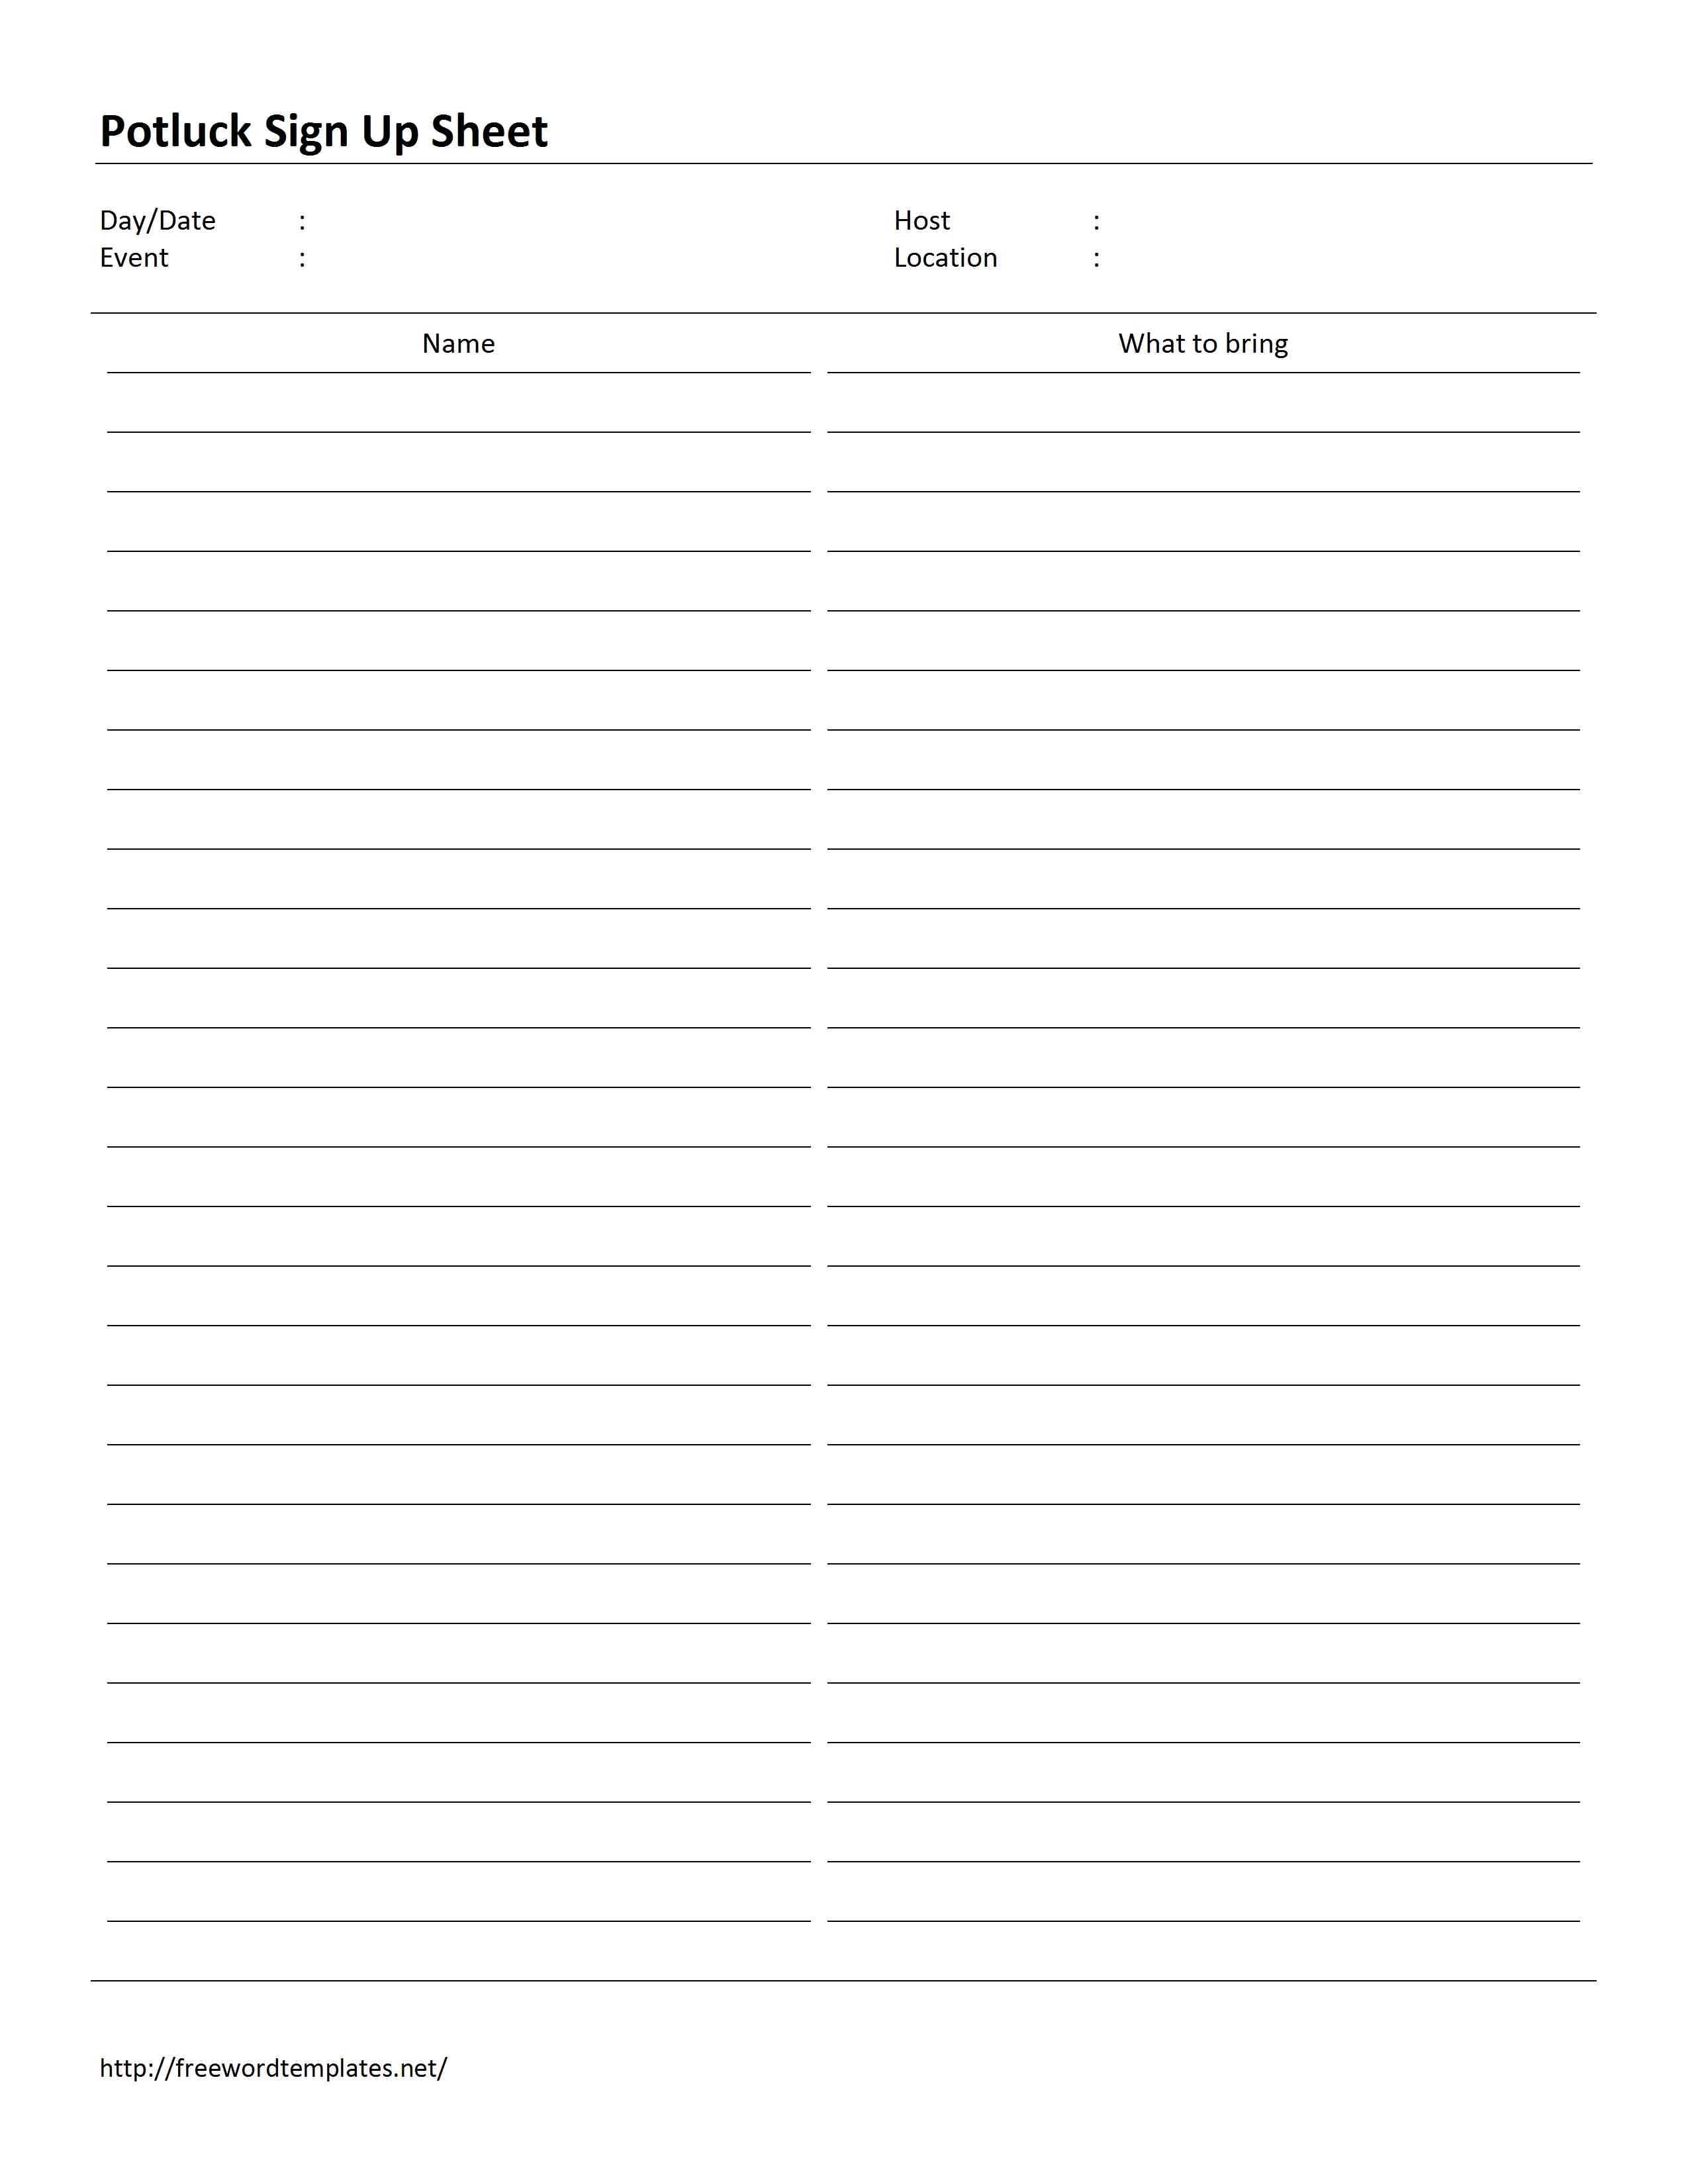 Electricity Worksheet Pdf Also Electrical Engineering Excel Spreadsheets Program Potluck Sign Up